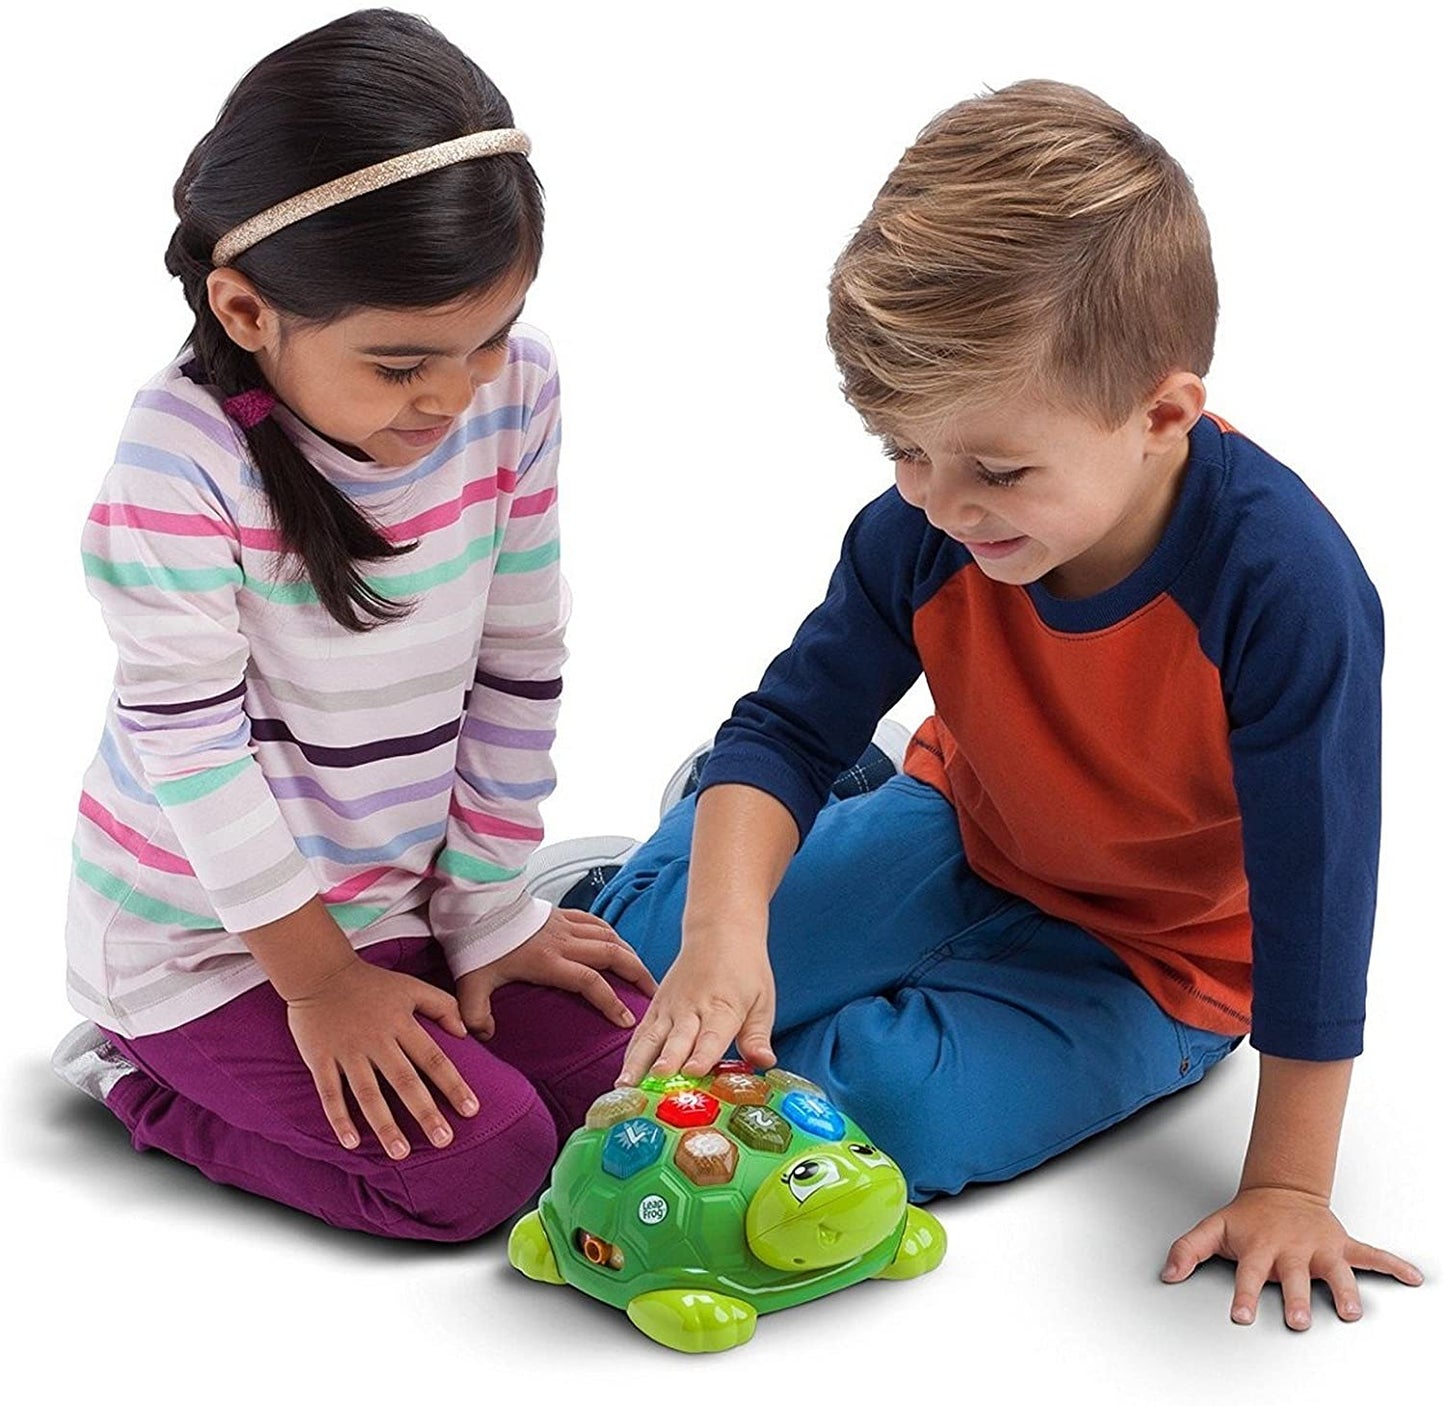 LeapFrog - The Musical Turtle Activity Book